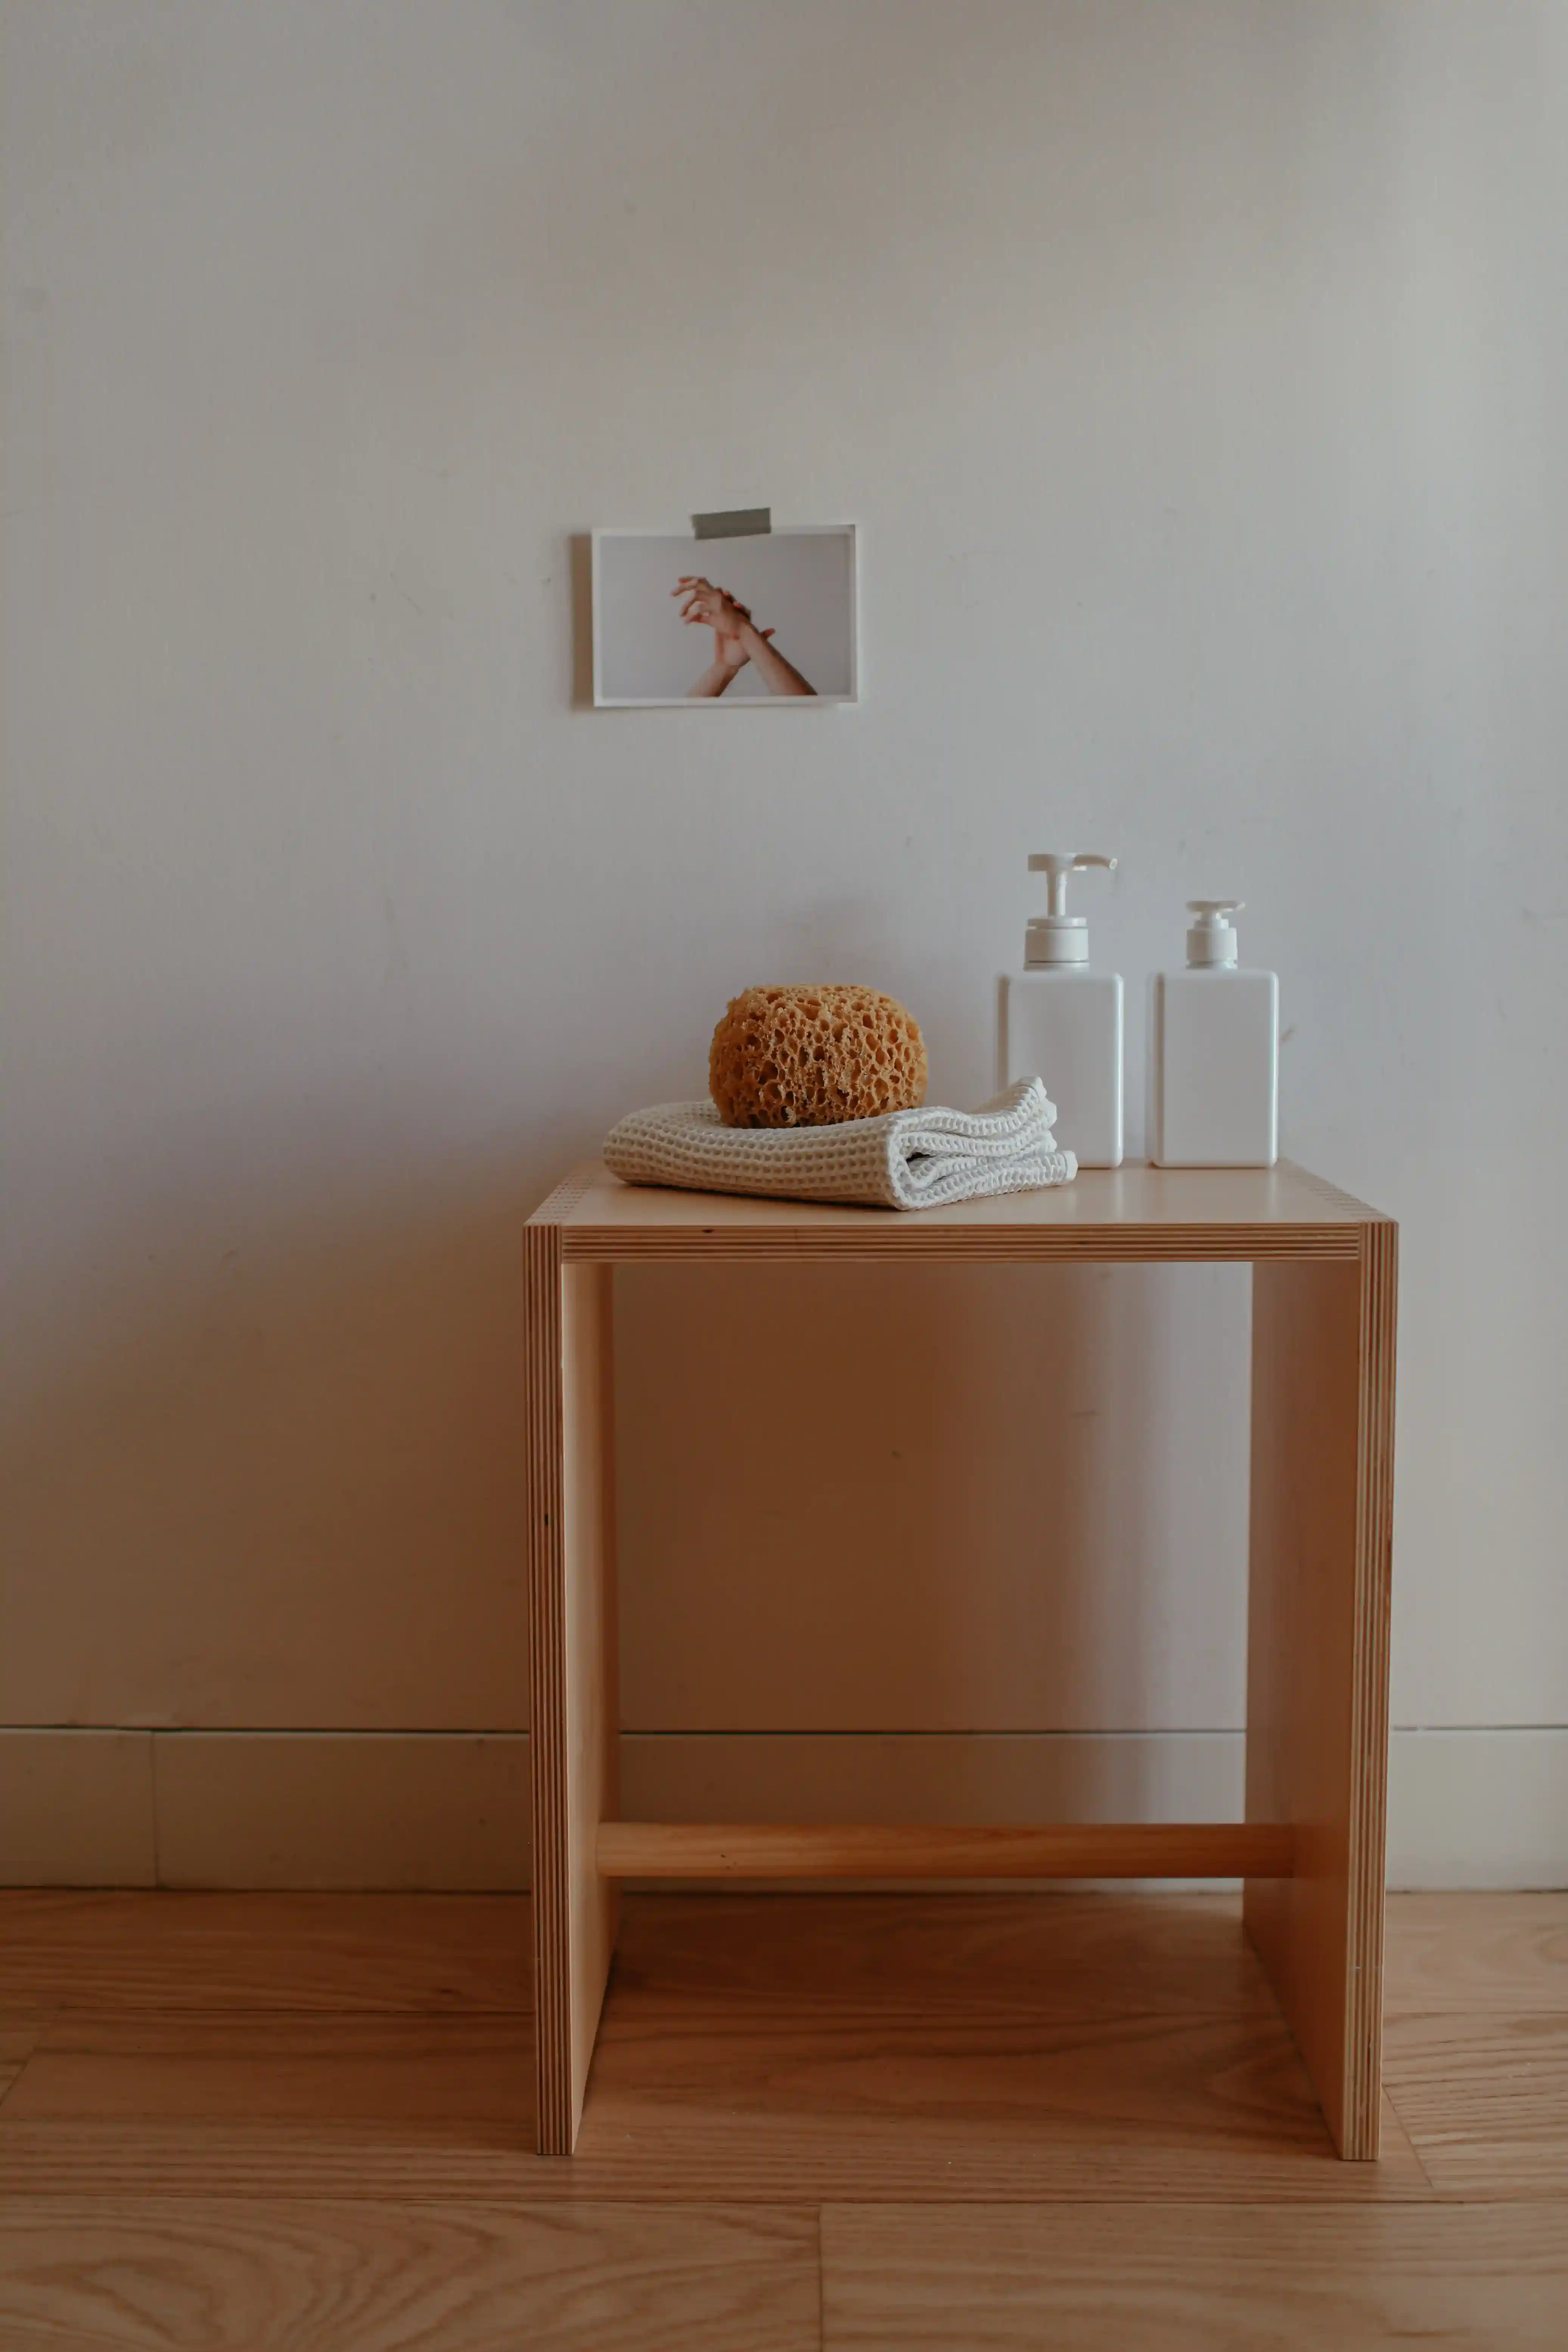 A small wooden desk with a minimalist design